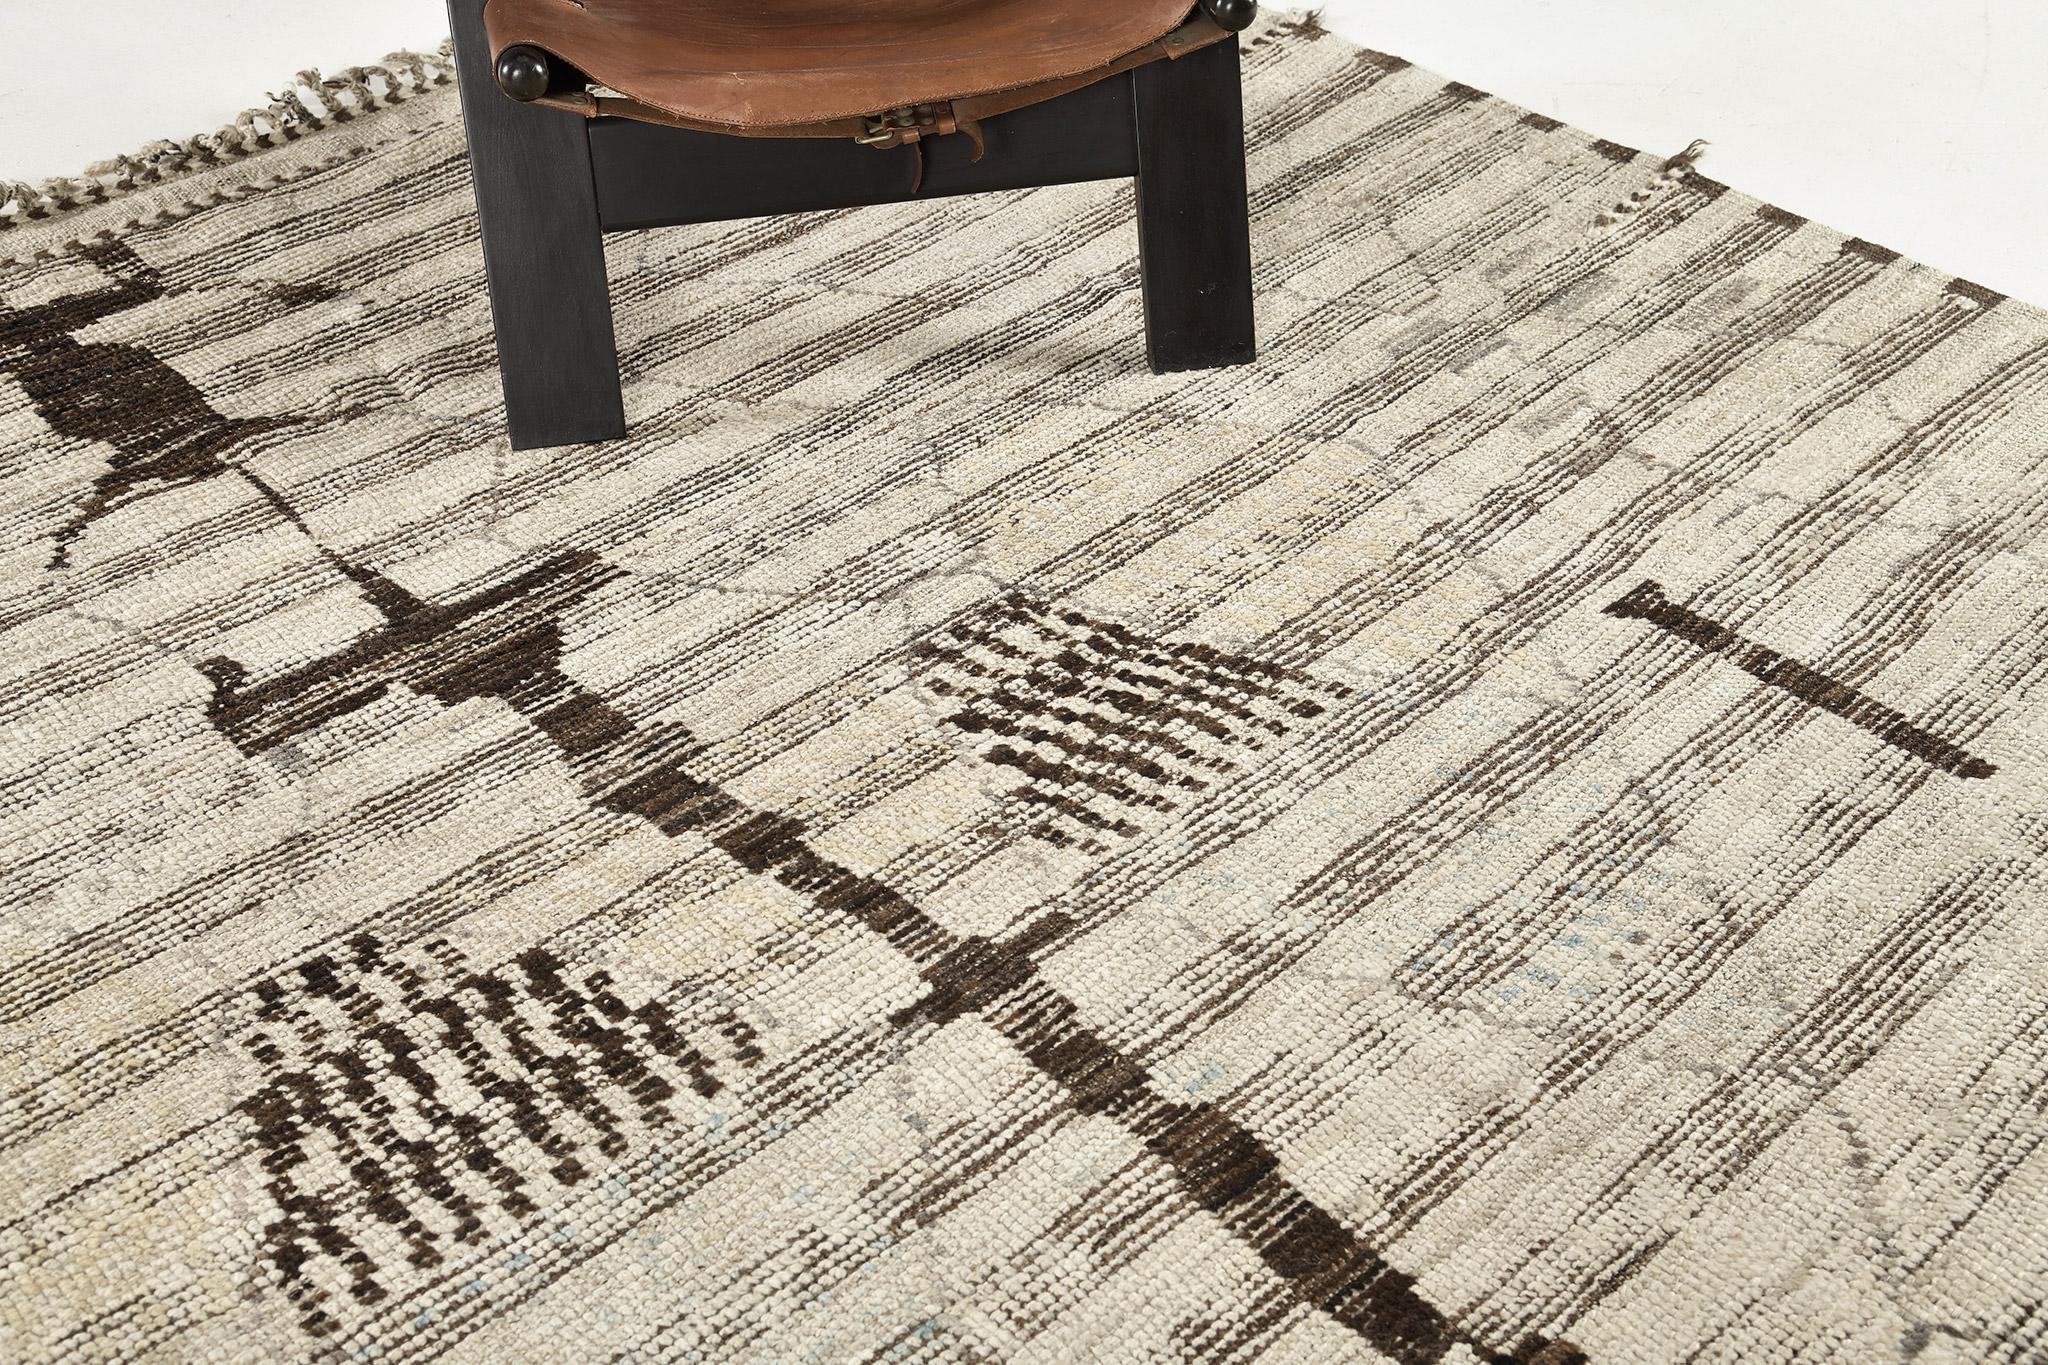 Rebabi is a unique wool shag that combines unique design elements and linework for the modern design world. Its weaving of natural earth tones and hints of colors are suitable for many interiors and are what makes the Atlas Collection so unique and